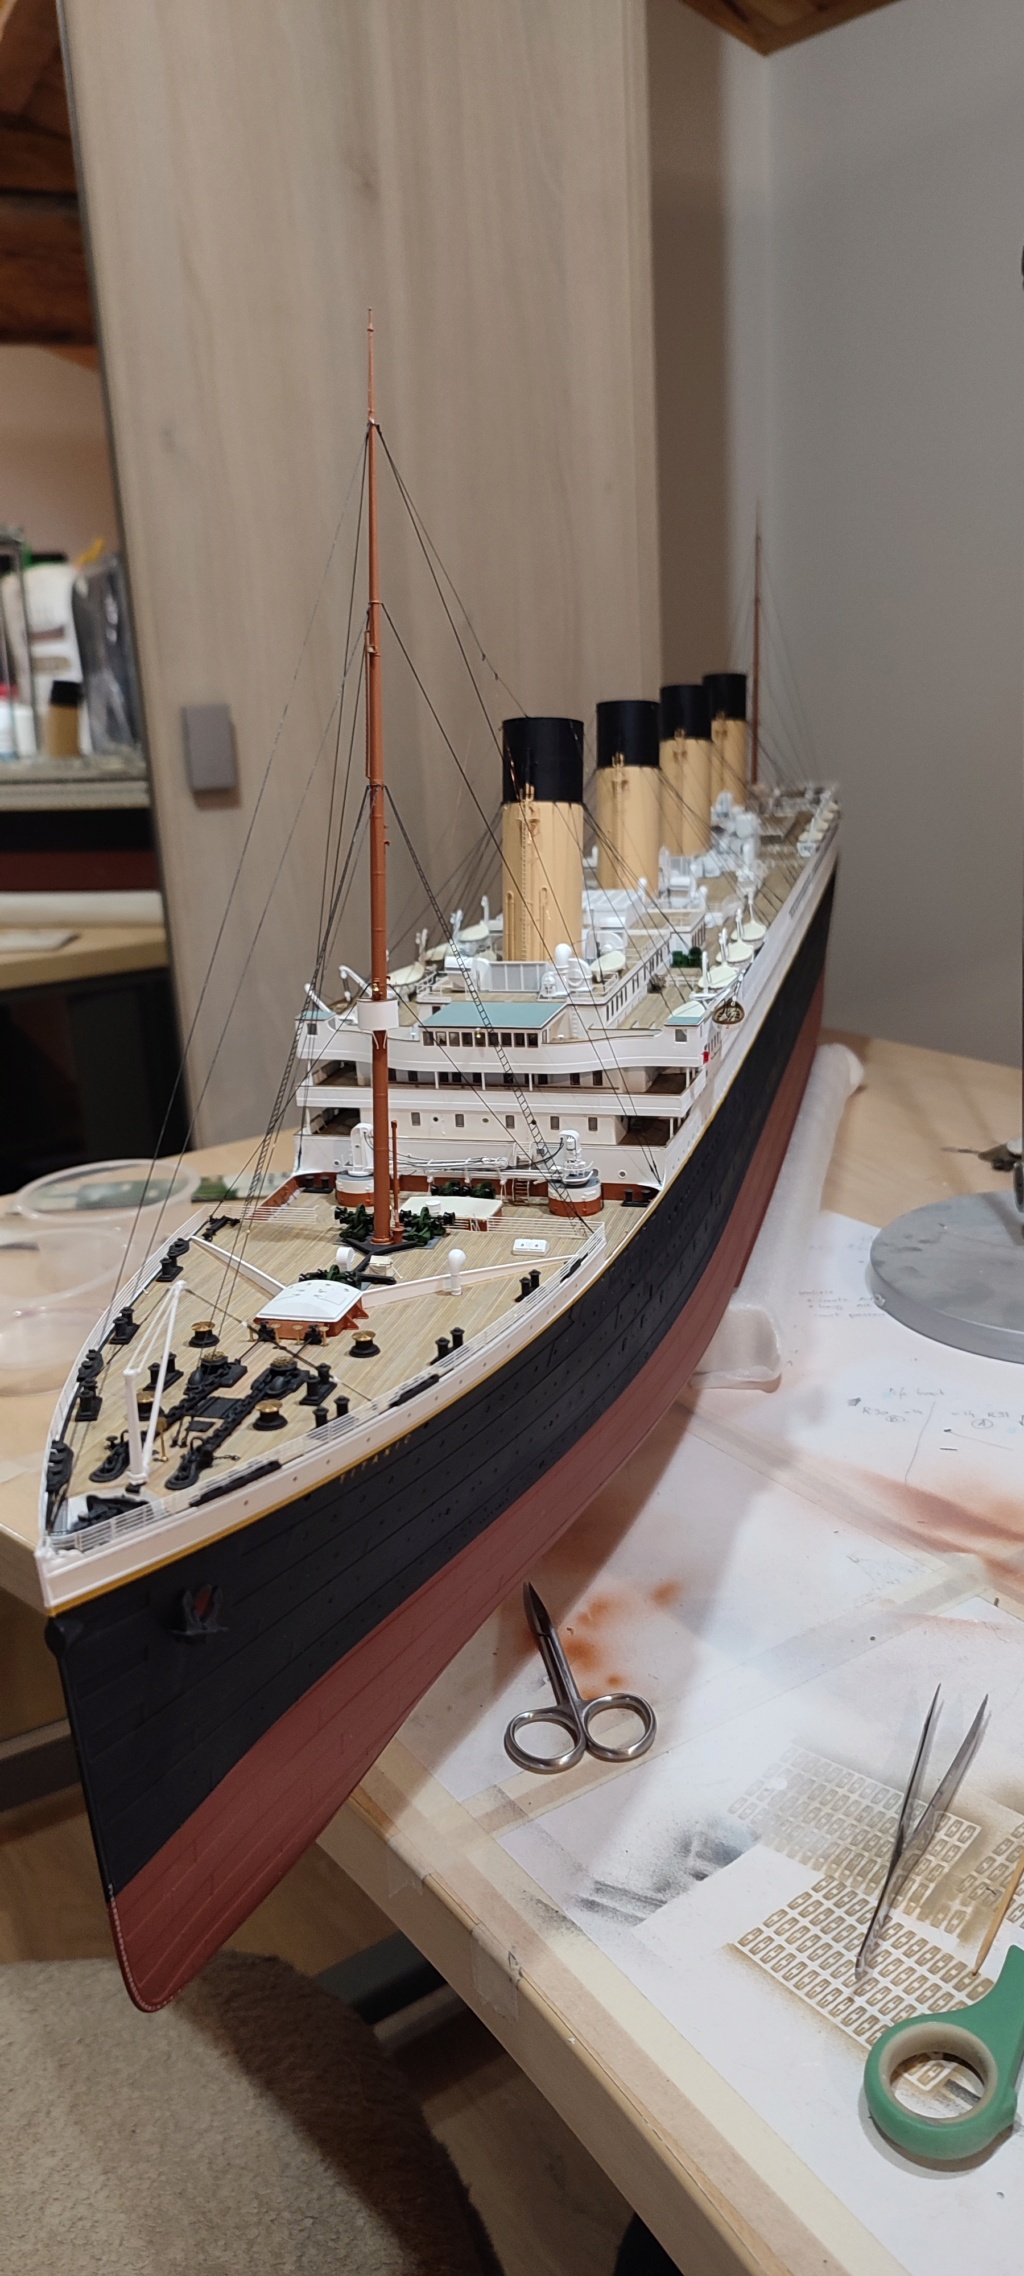 RMS Titanic [Trumpeter 1/200°] de panther - Page 15 Img_1068